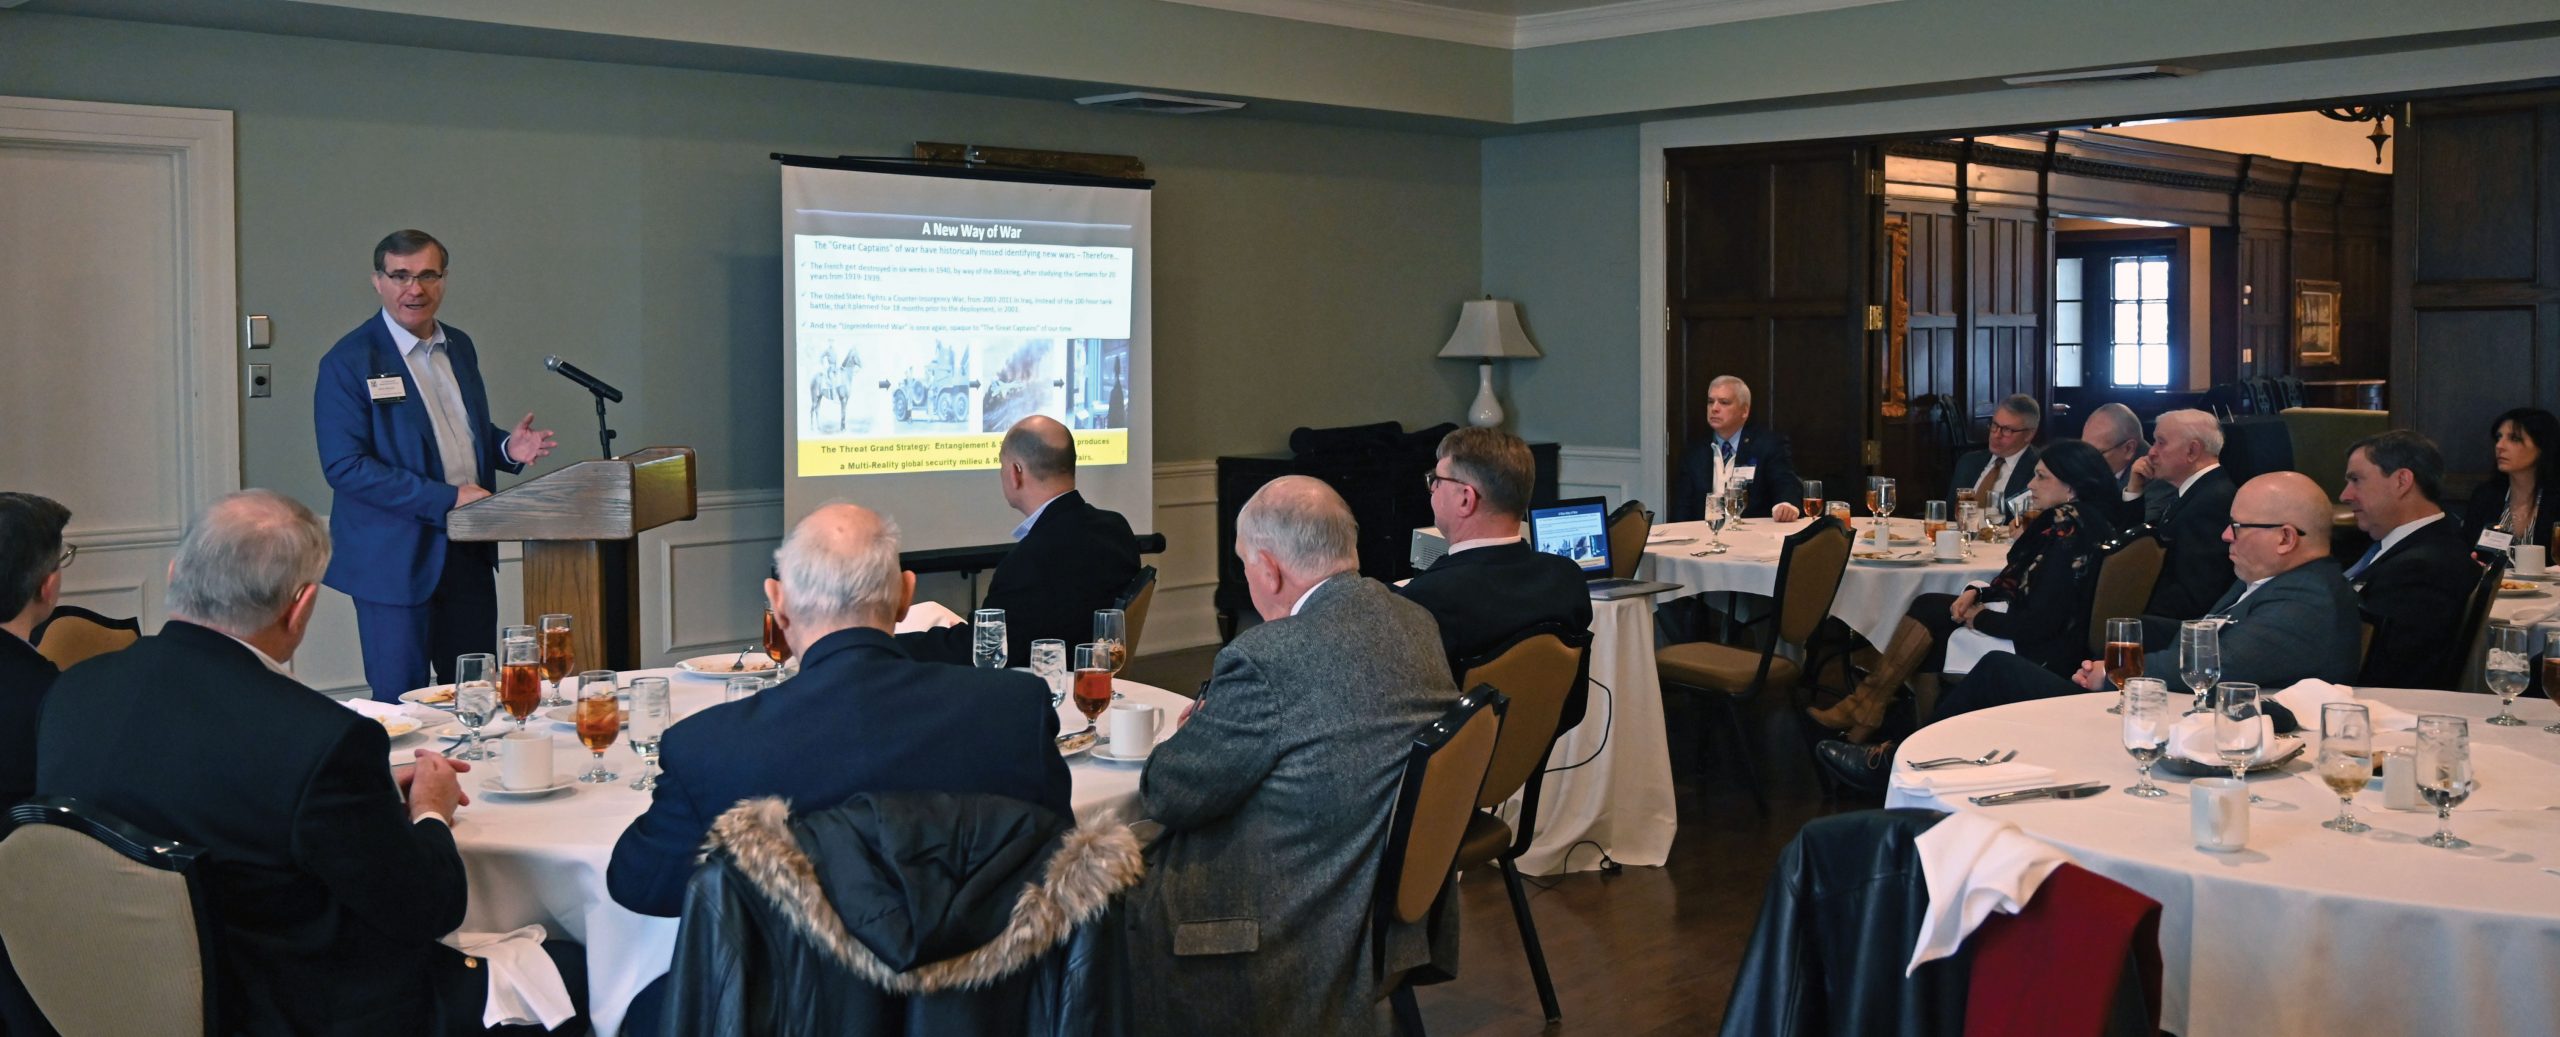 Retired Col. Steve Banach provides his presentation on virtual warfare for the Arter-Rowland National Security Forum luncheon event on Jan. 27, 2022, at the Carriage Club in downtown Kansas City.